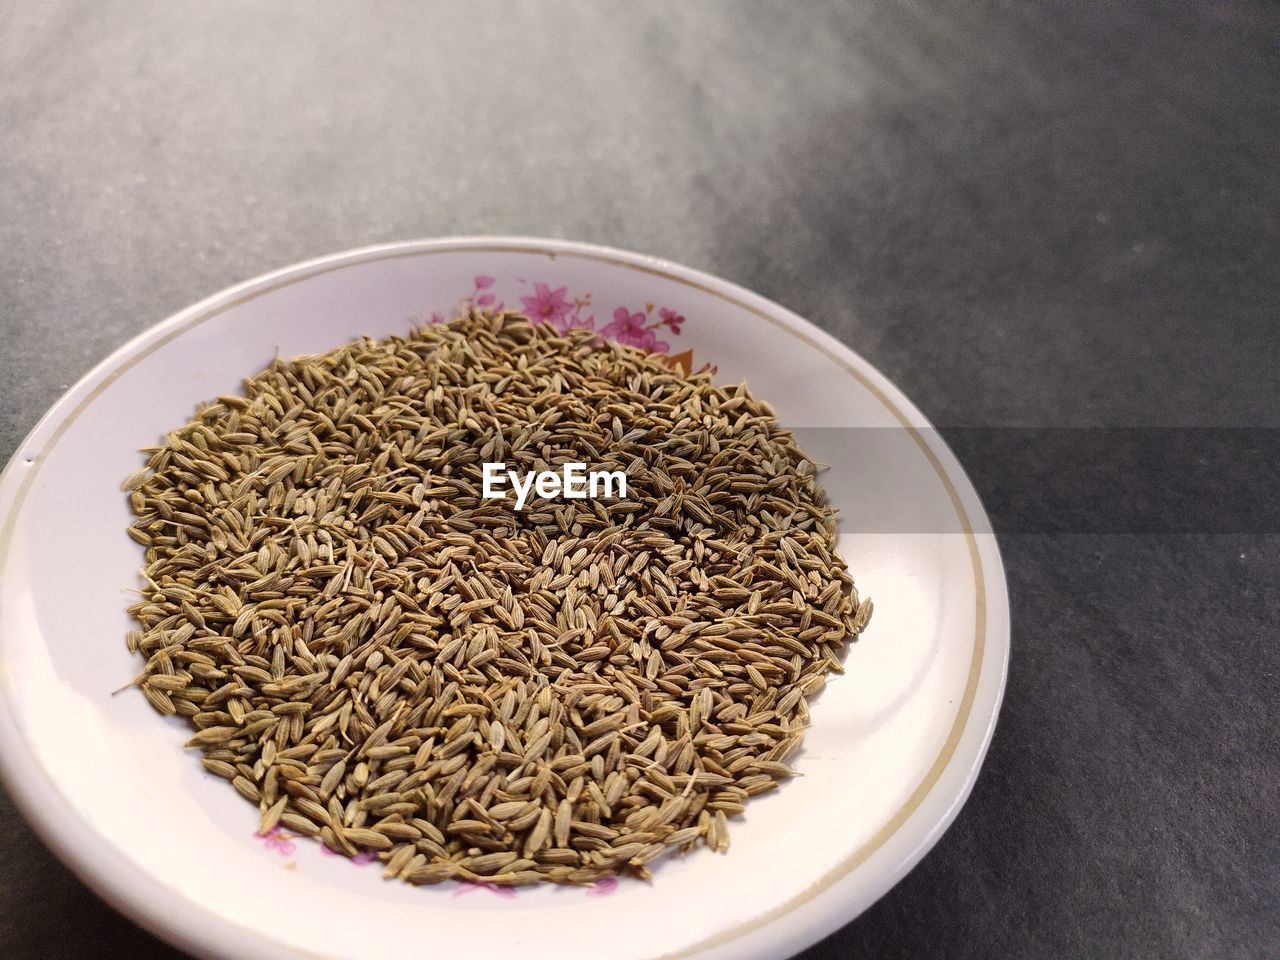 Cumin seed in a plate, an essential ingredient for tasty and delicious food.